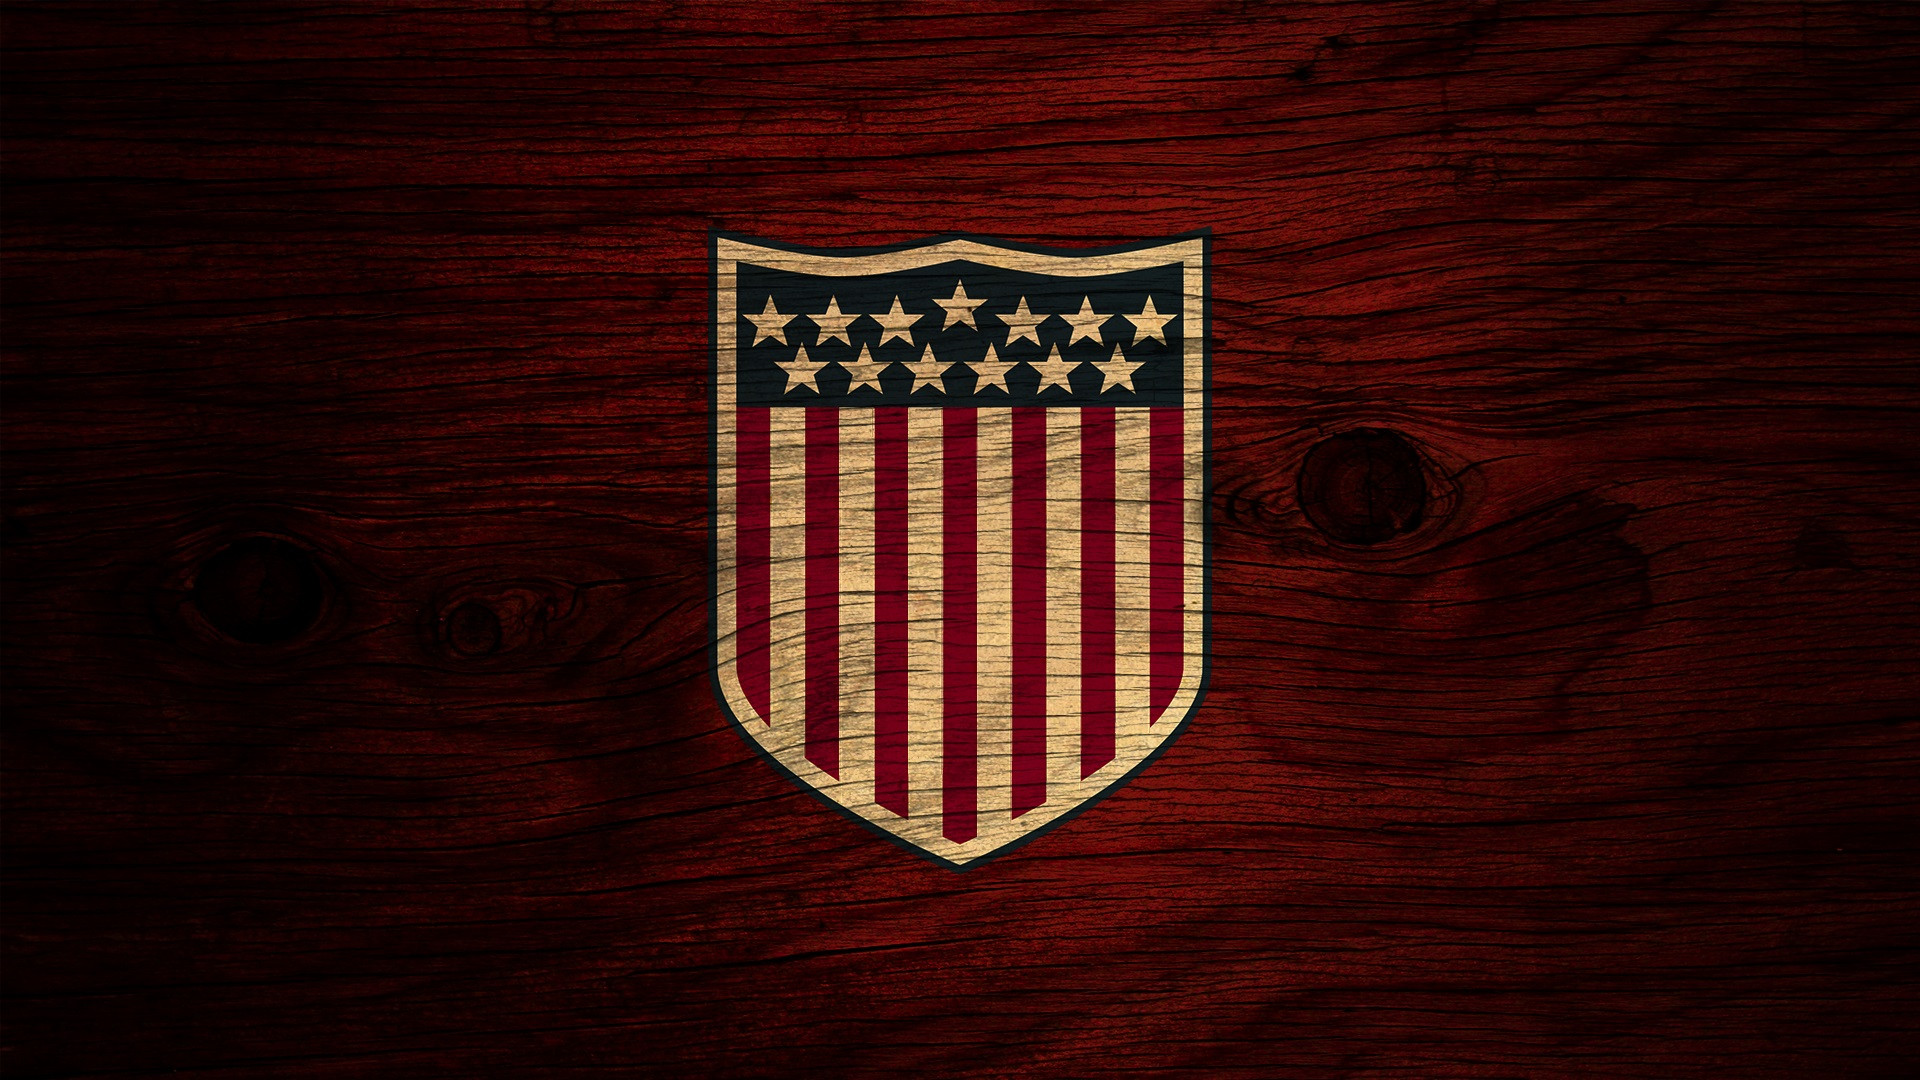 national teams united states wallpapers 795 8 wallpaper id 2263 1920x1080